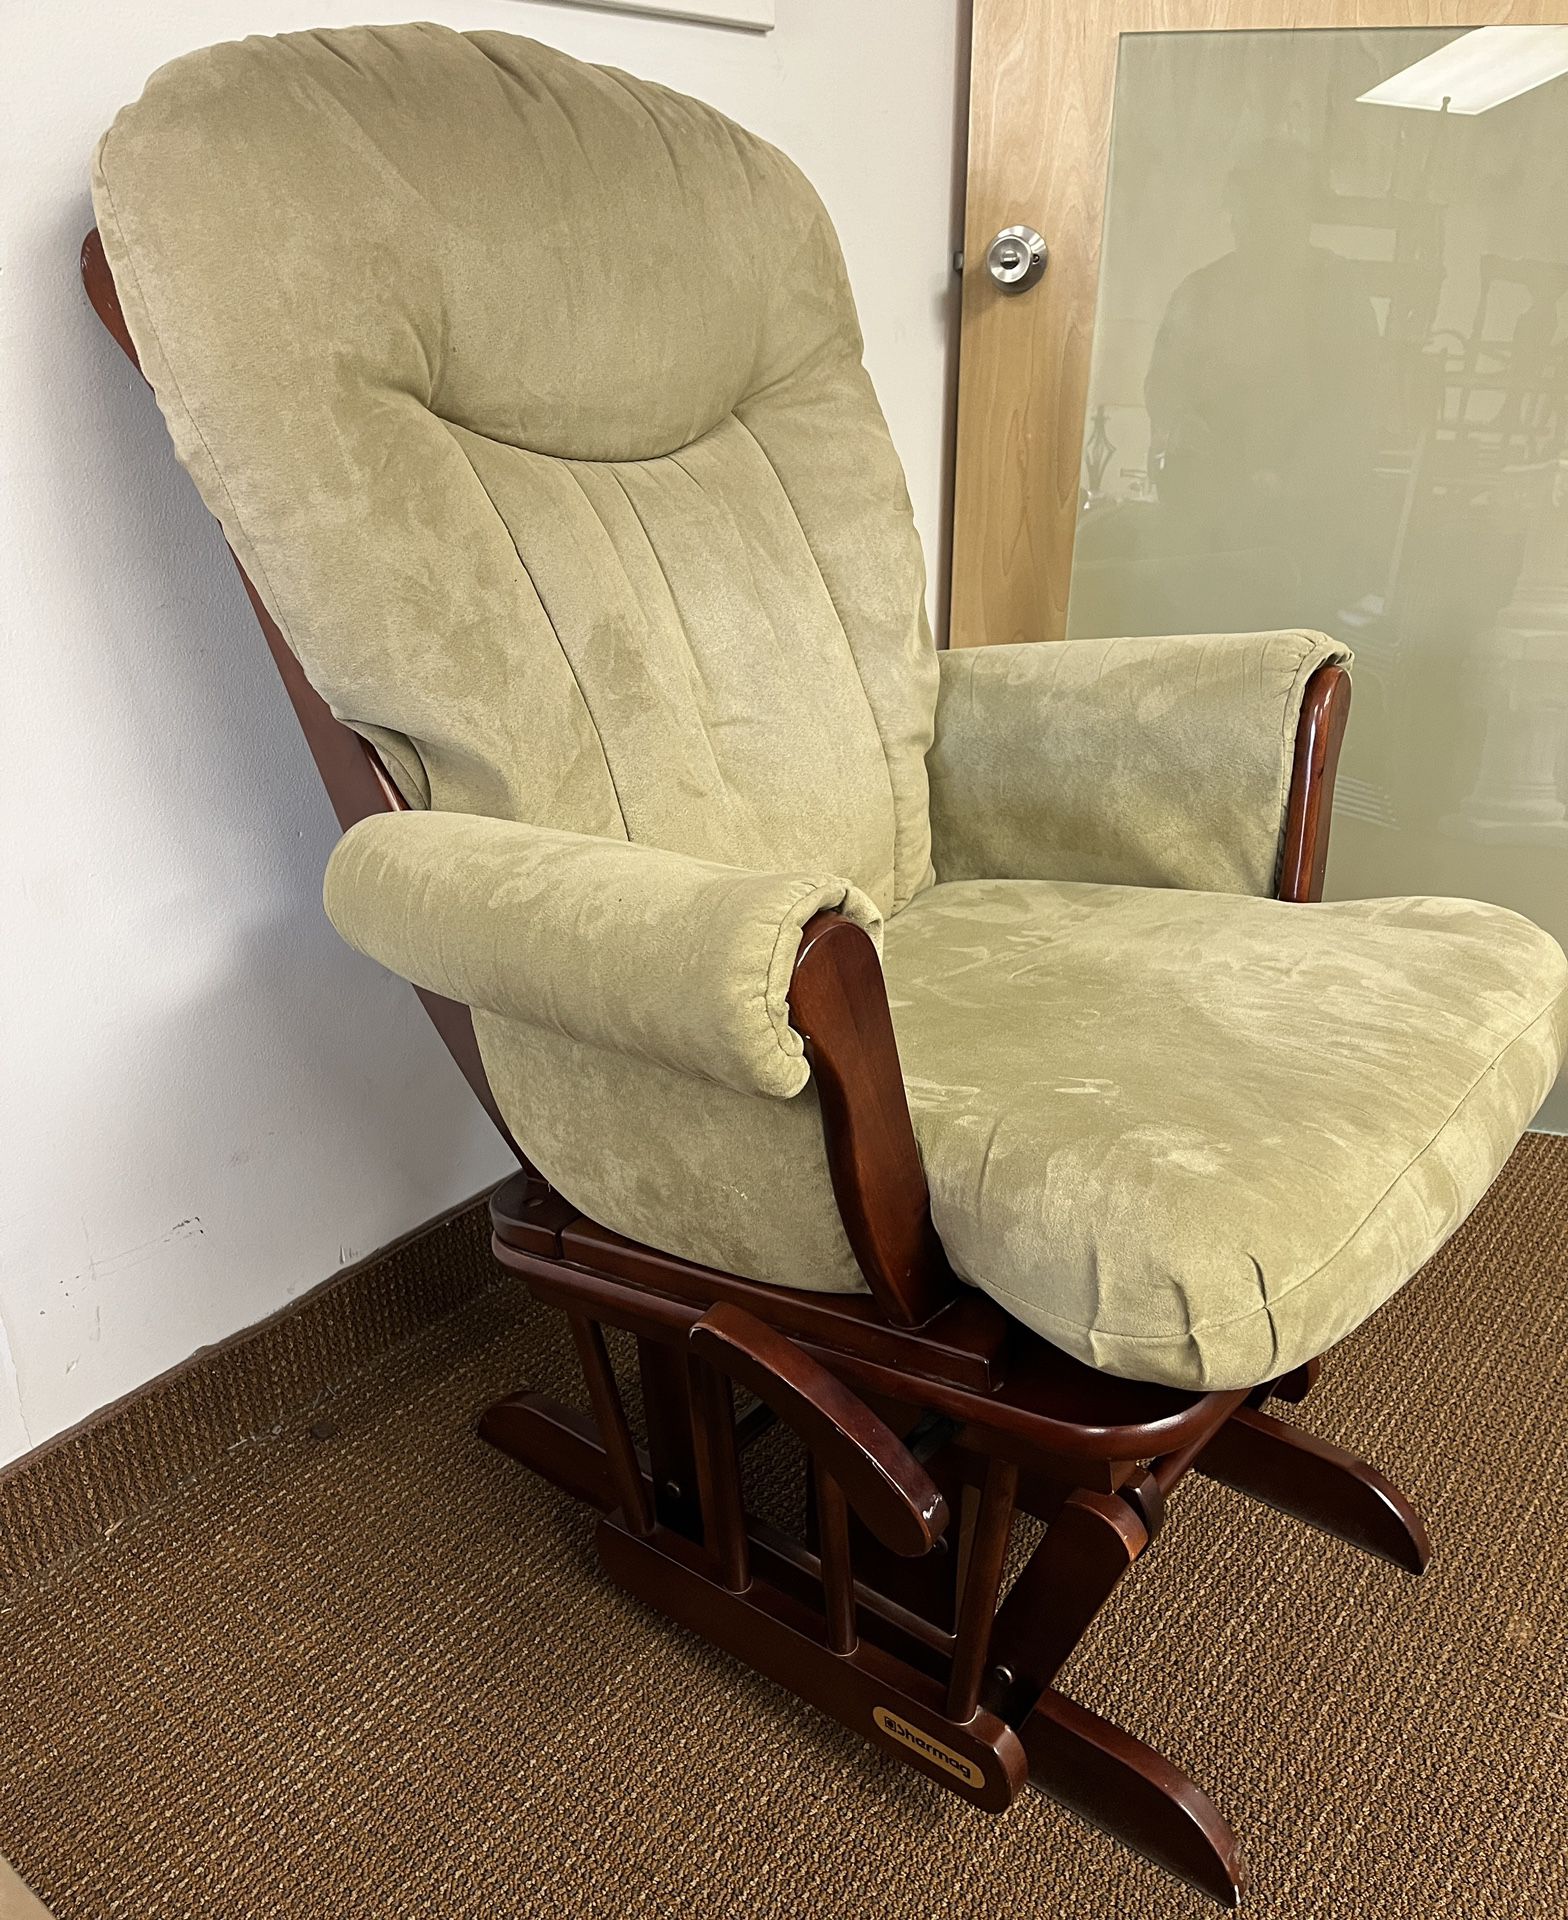 Shermag Glider Chair with Locking Arm. Gliding Rocking Chair